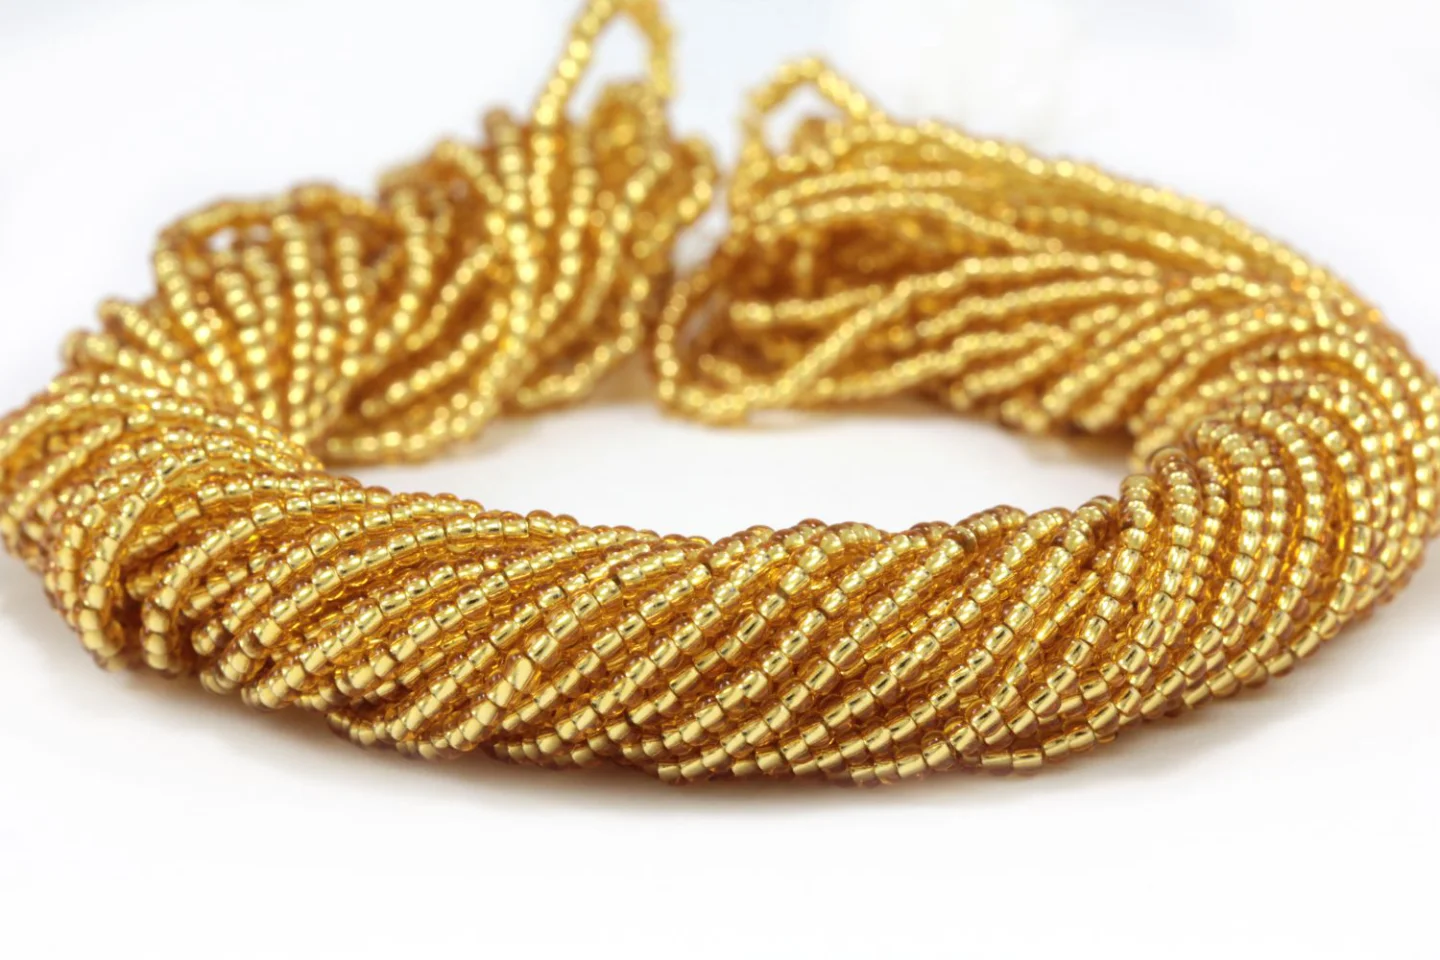 transparent-gold-seed-bead-17050.